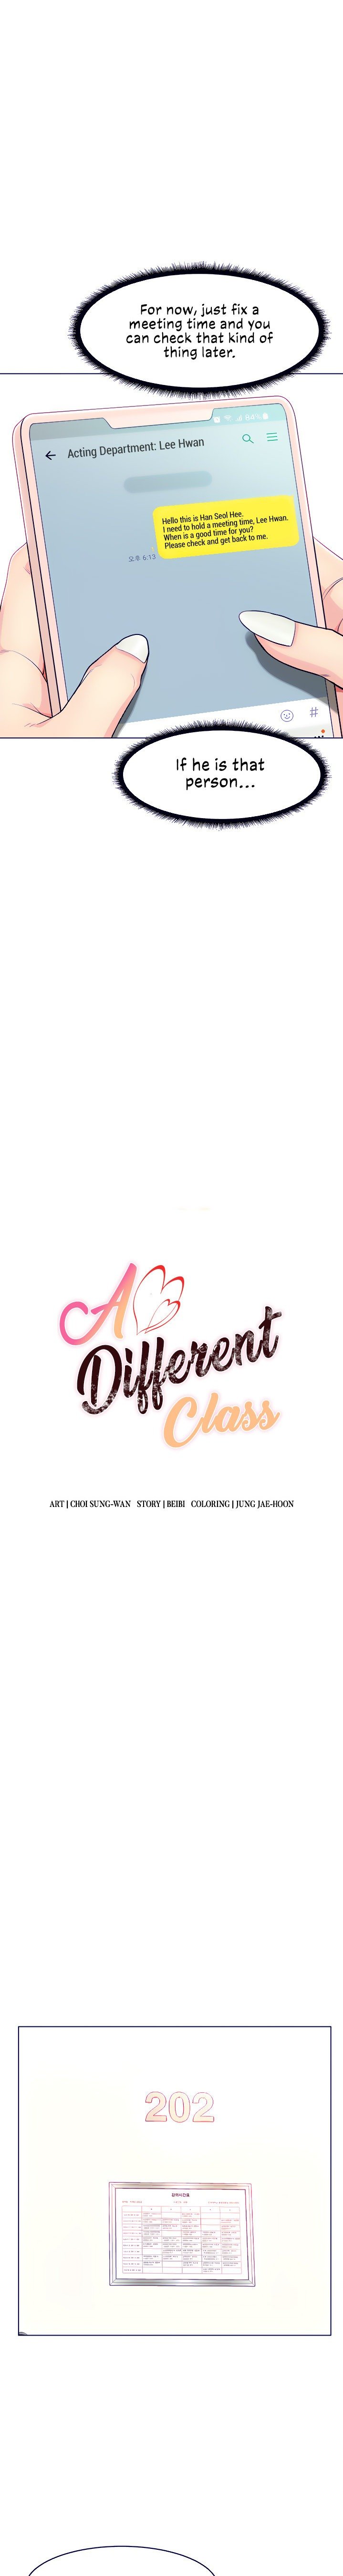 a-different-class-chap-5-11